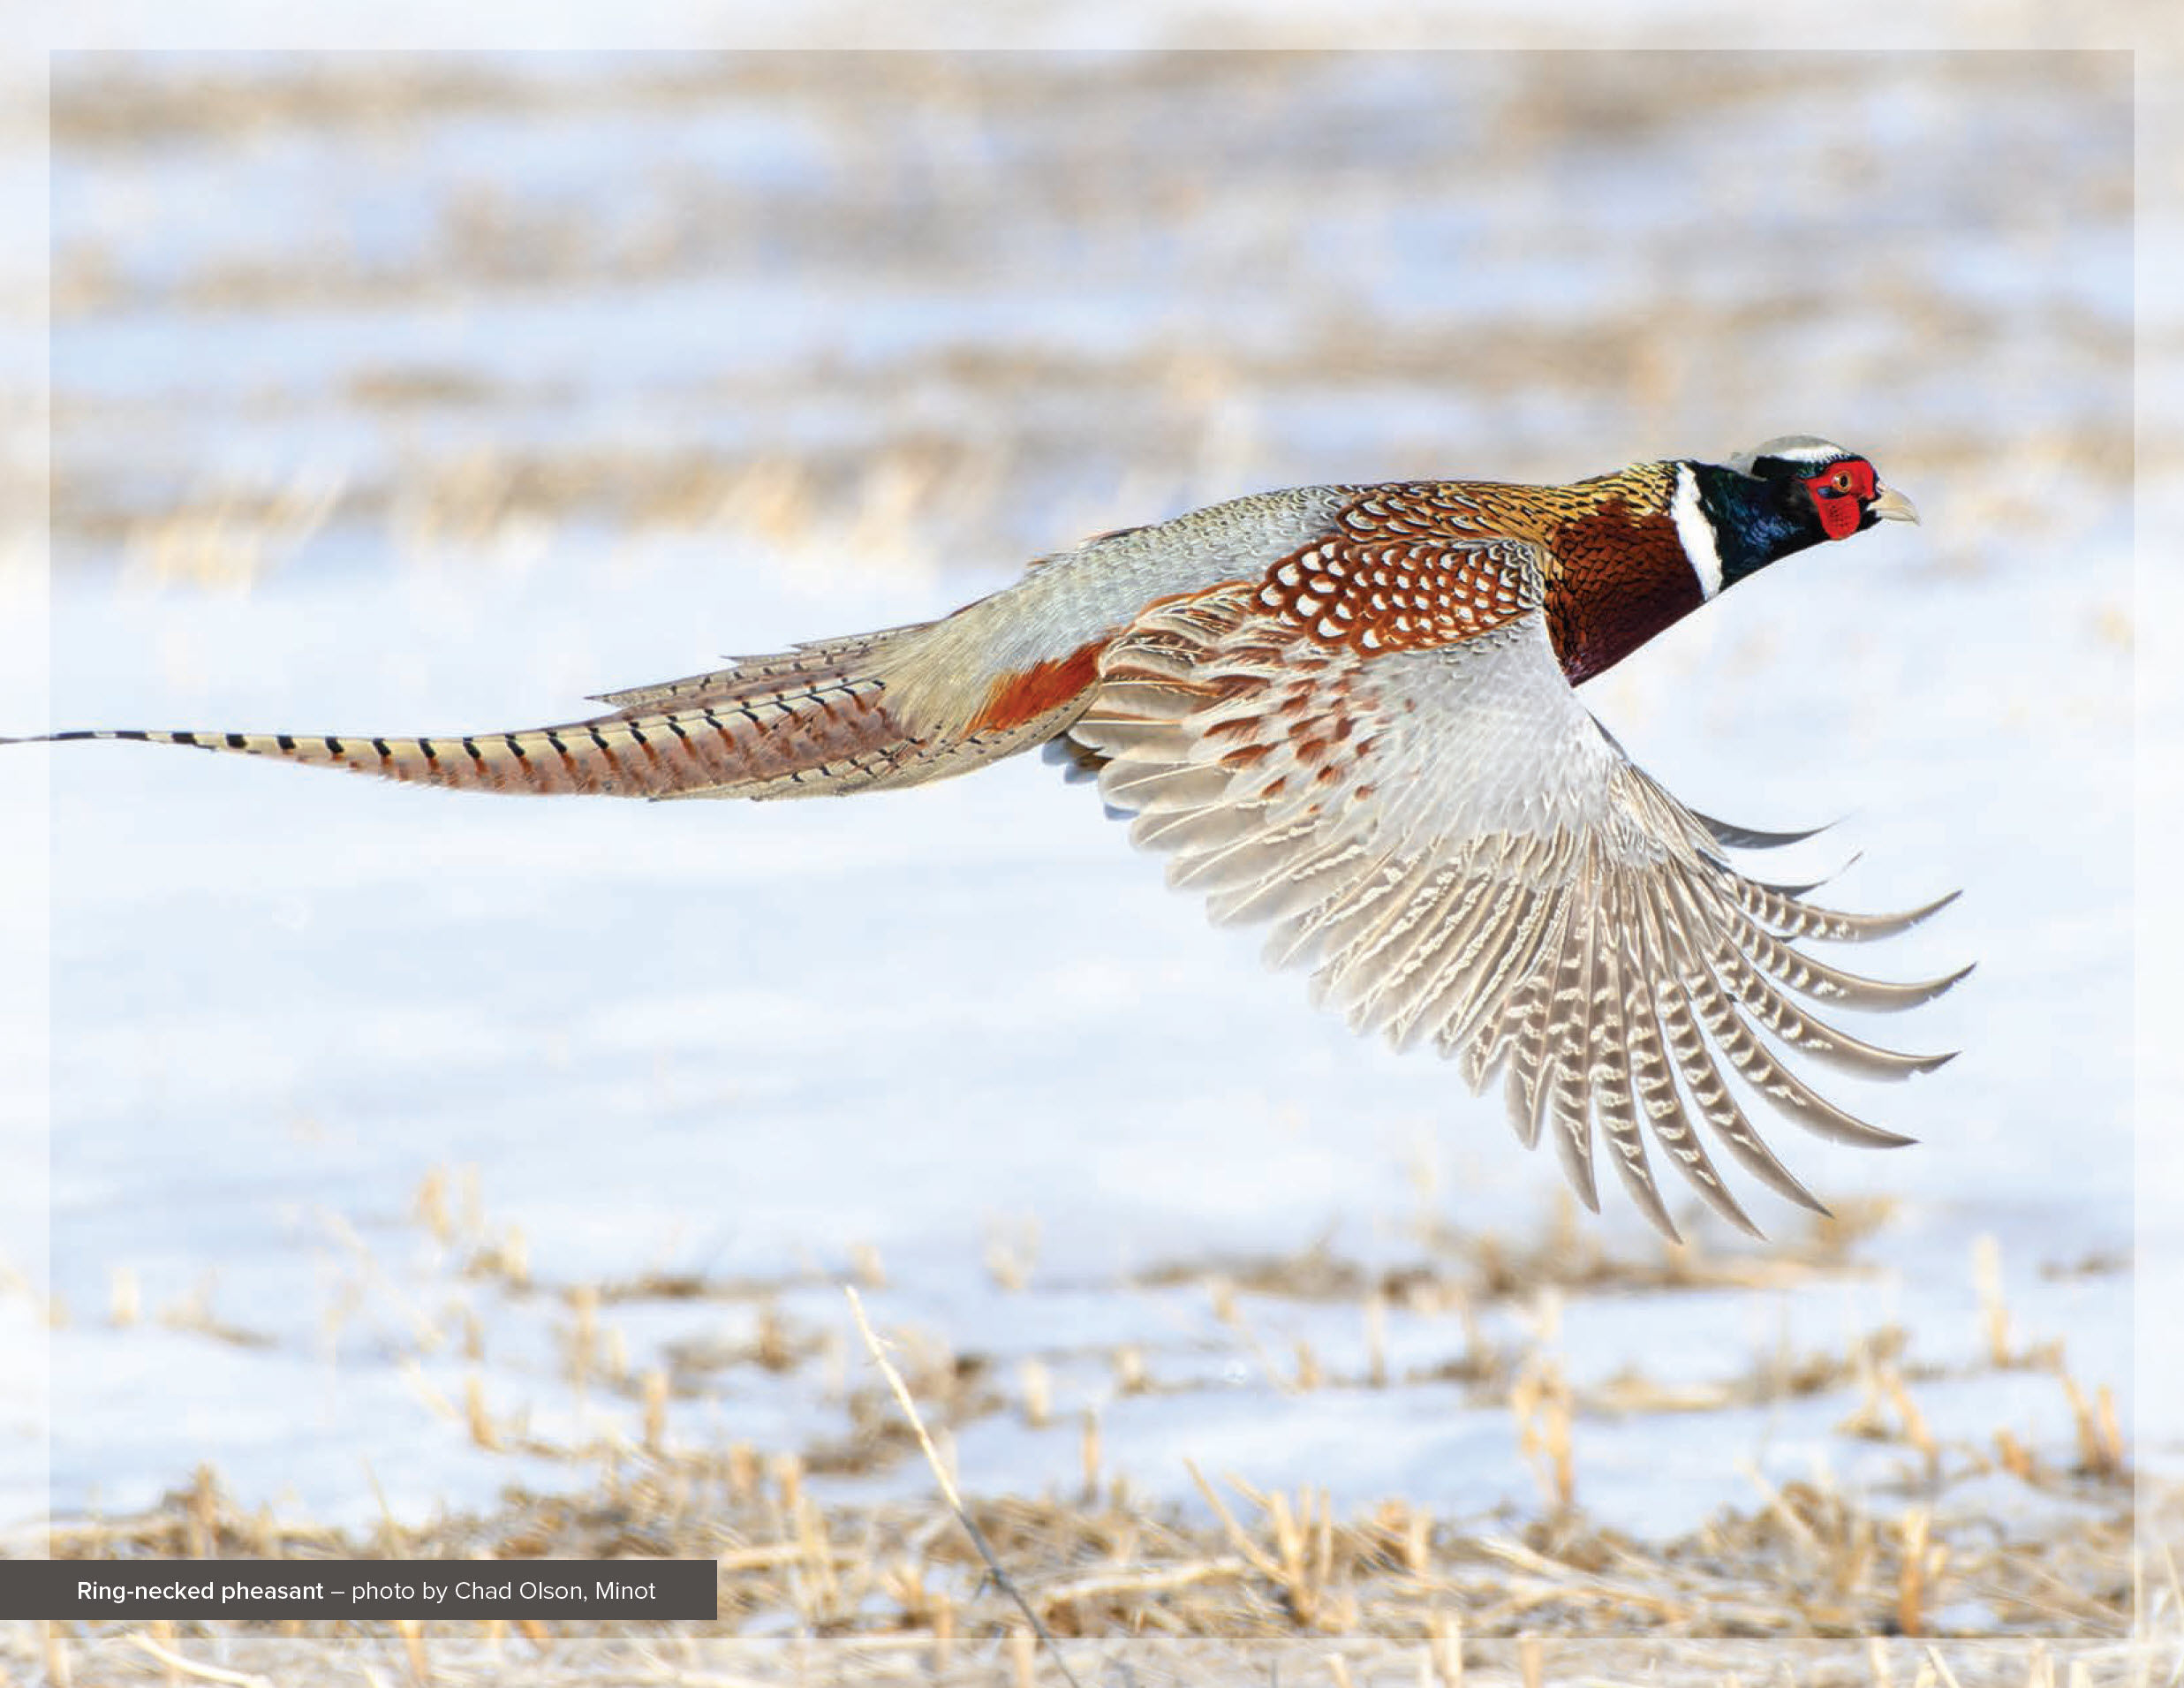 Ring-necked pheasant – photo by Chad Olson, Minot